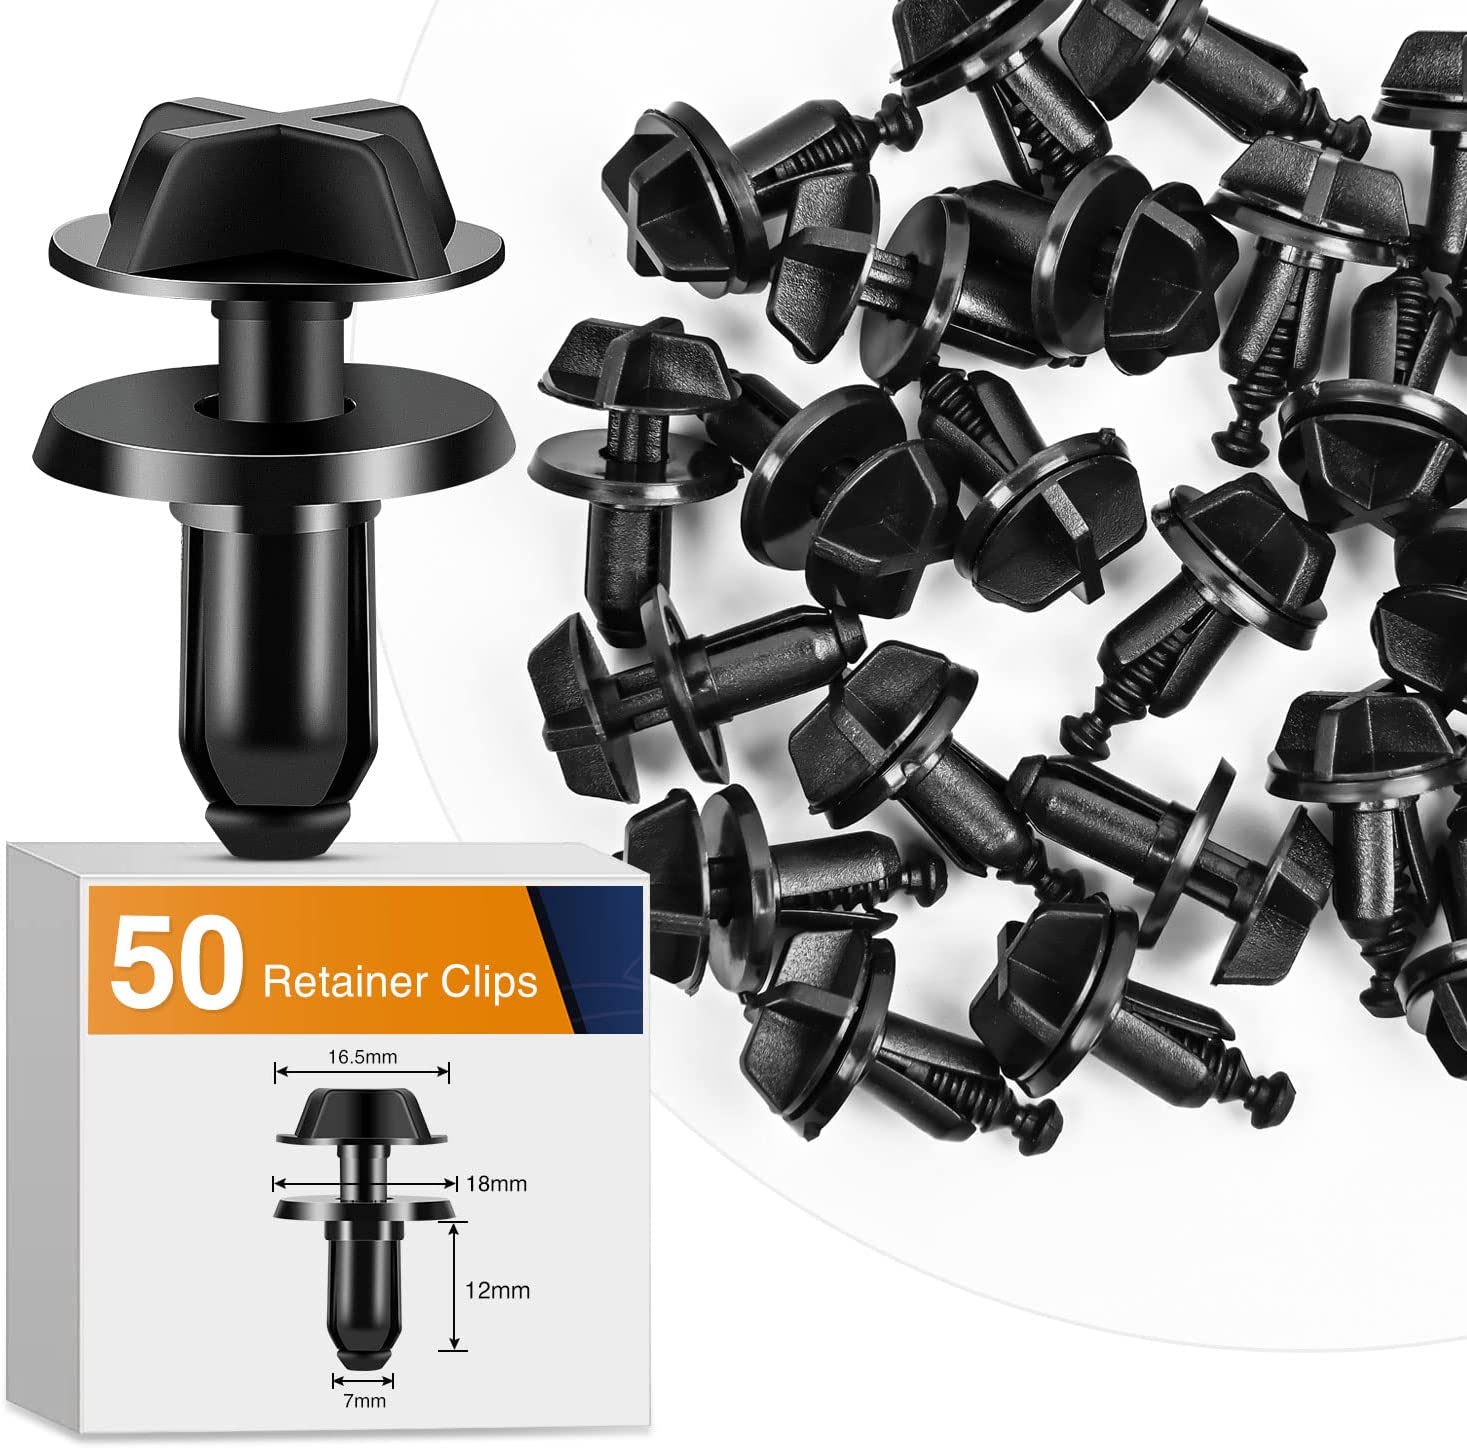 50 Pcs Lower Radiator Shield Push-Type Retainer Clips For Ford #W716510-S300 F-150 Mustang Fusion Aviator Explorer